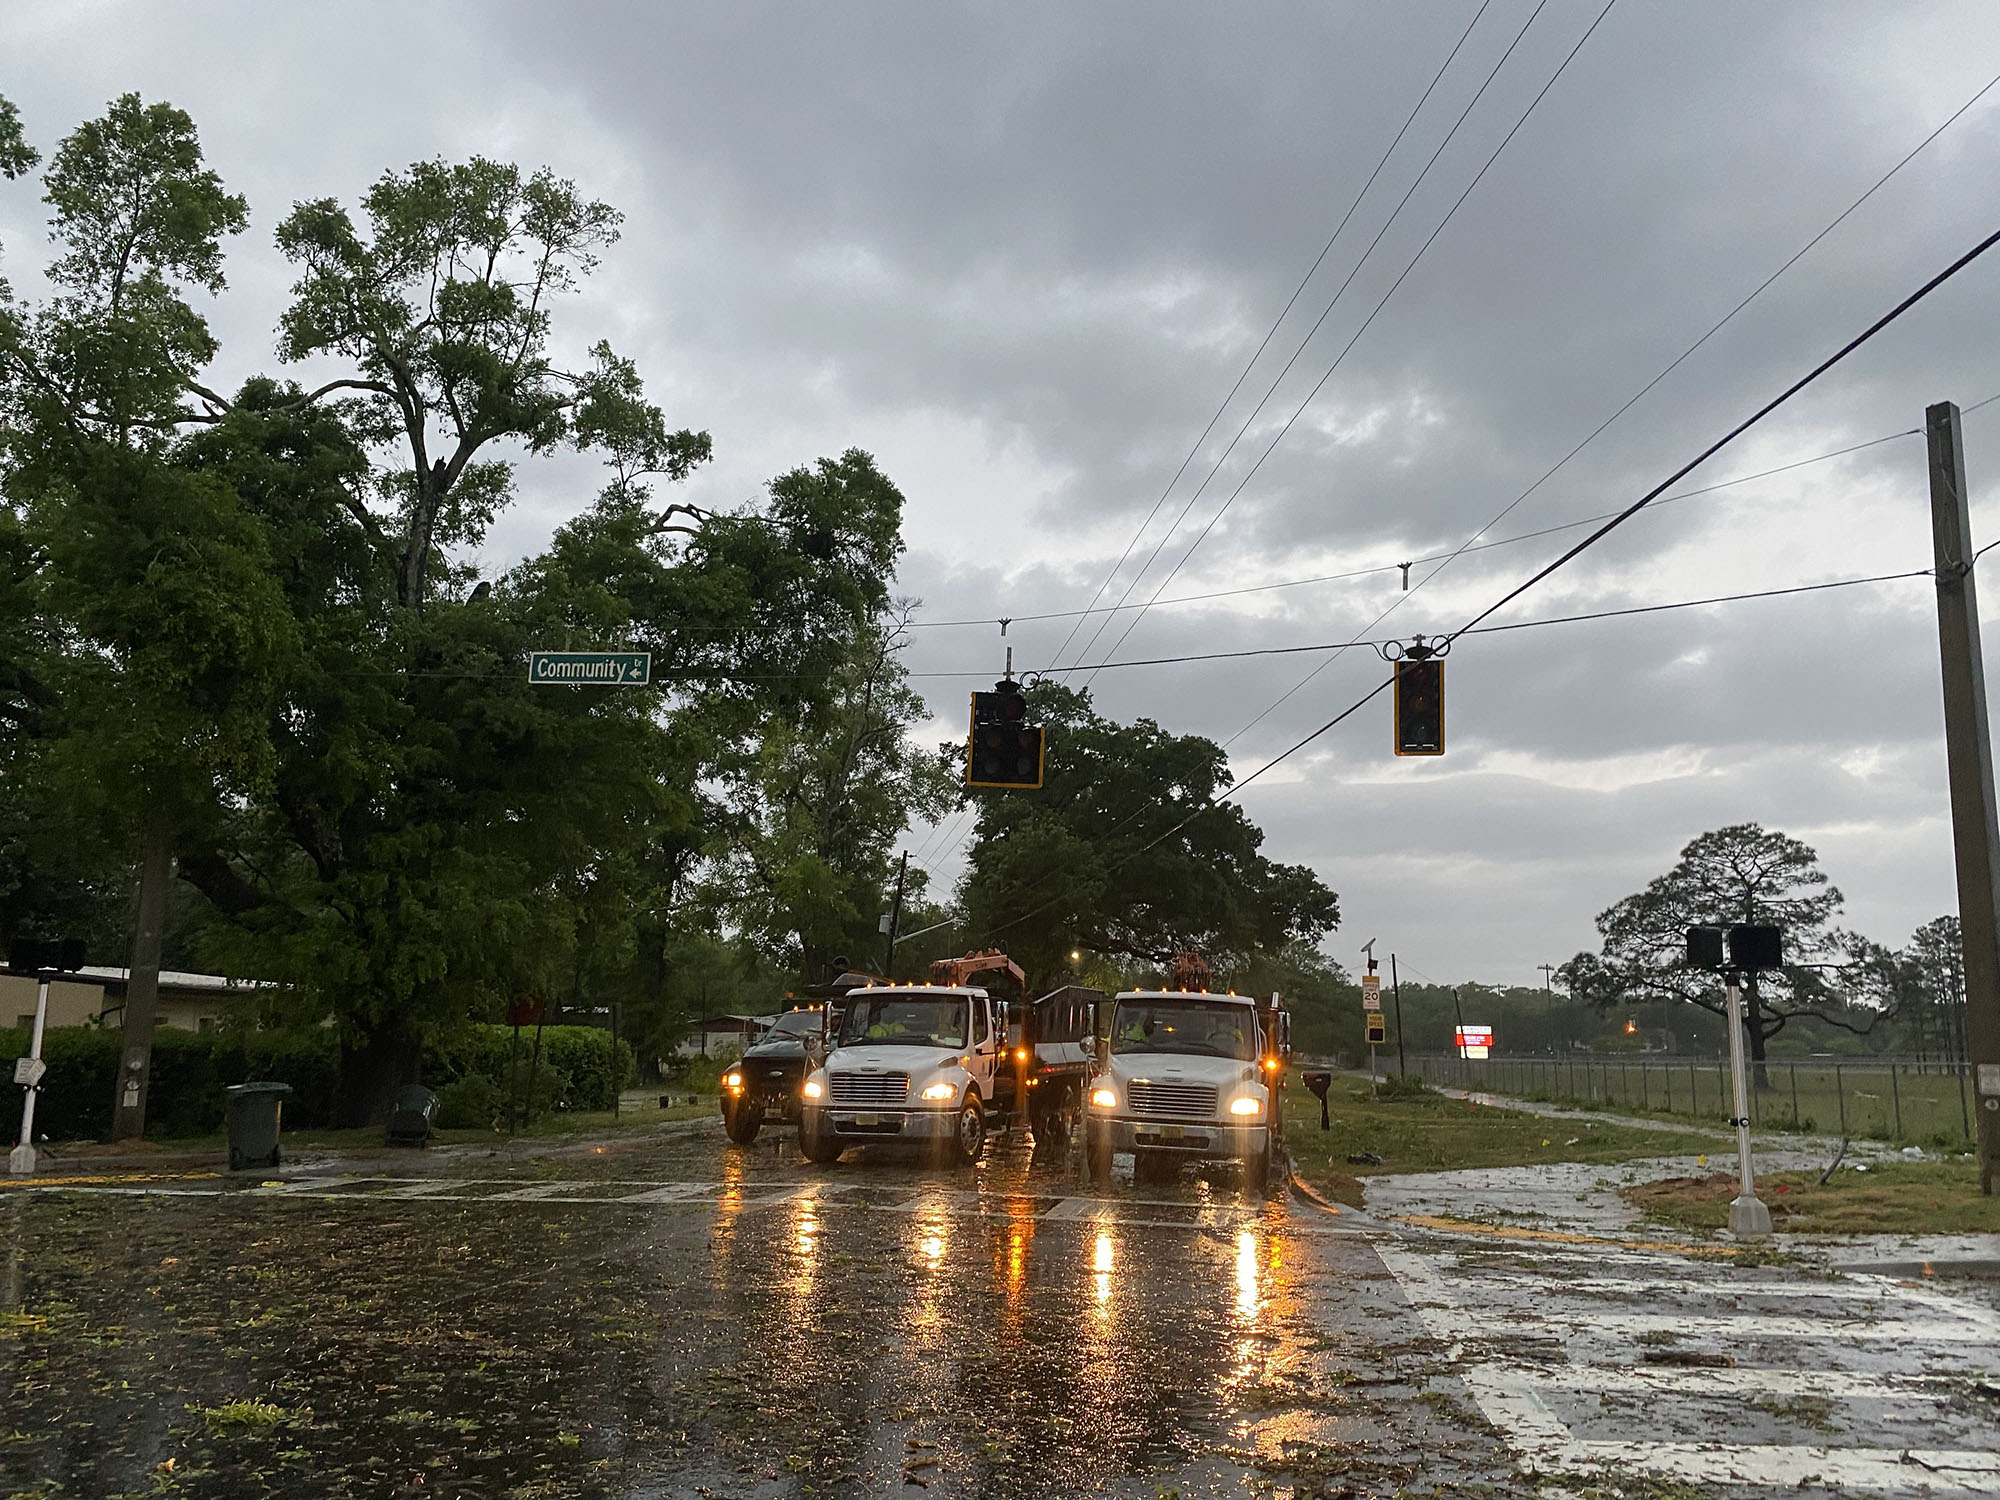 Traffic Signal Out at Longleaf and Community Drive Intersection